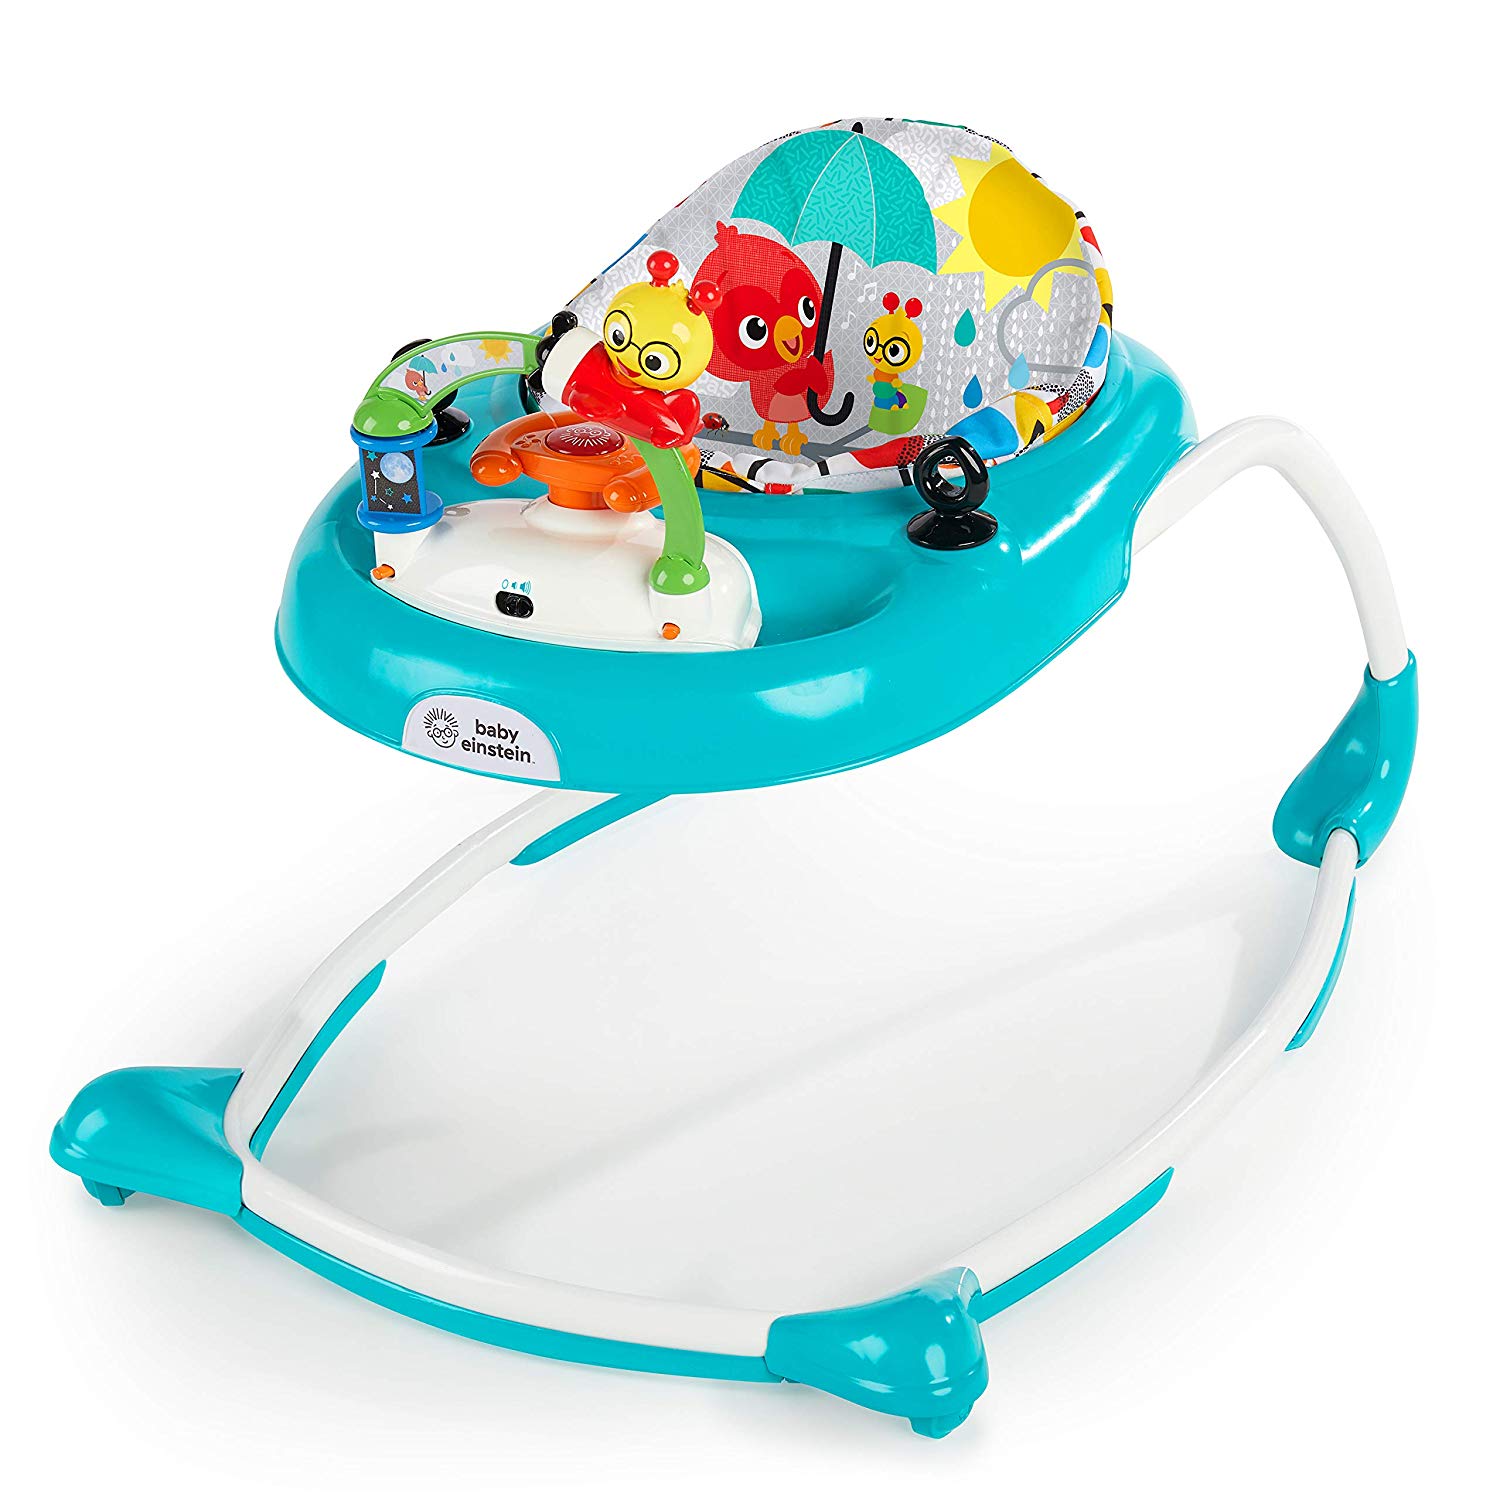 Baby Einstein, Sky Explorer Walker with Lights, Melodies and Removable Play Station, Height Adjustable, Easy to Clean Seat Pad